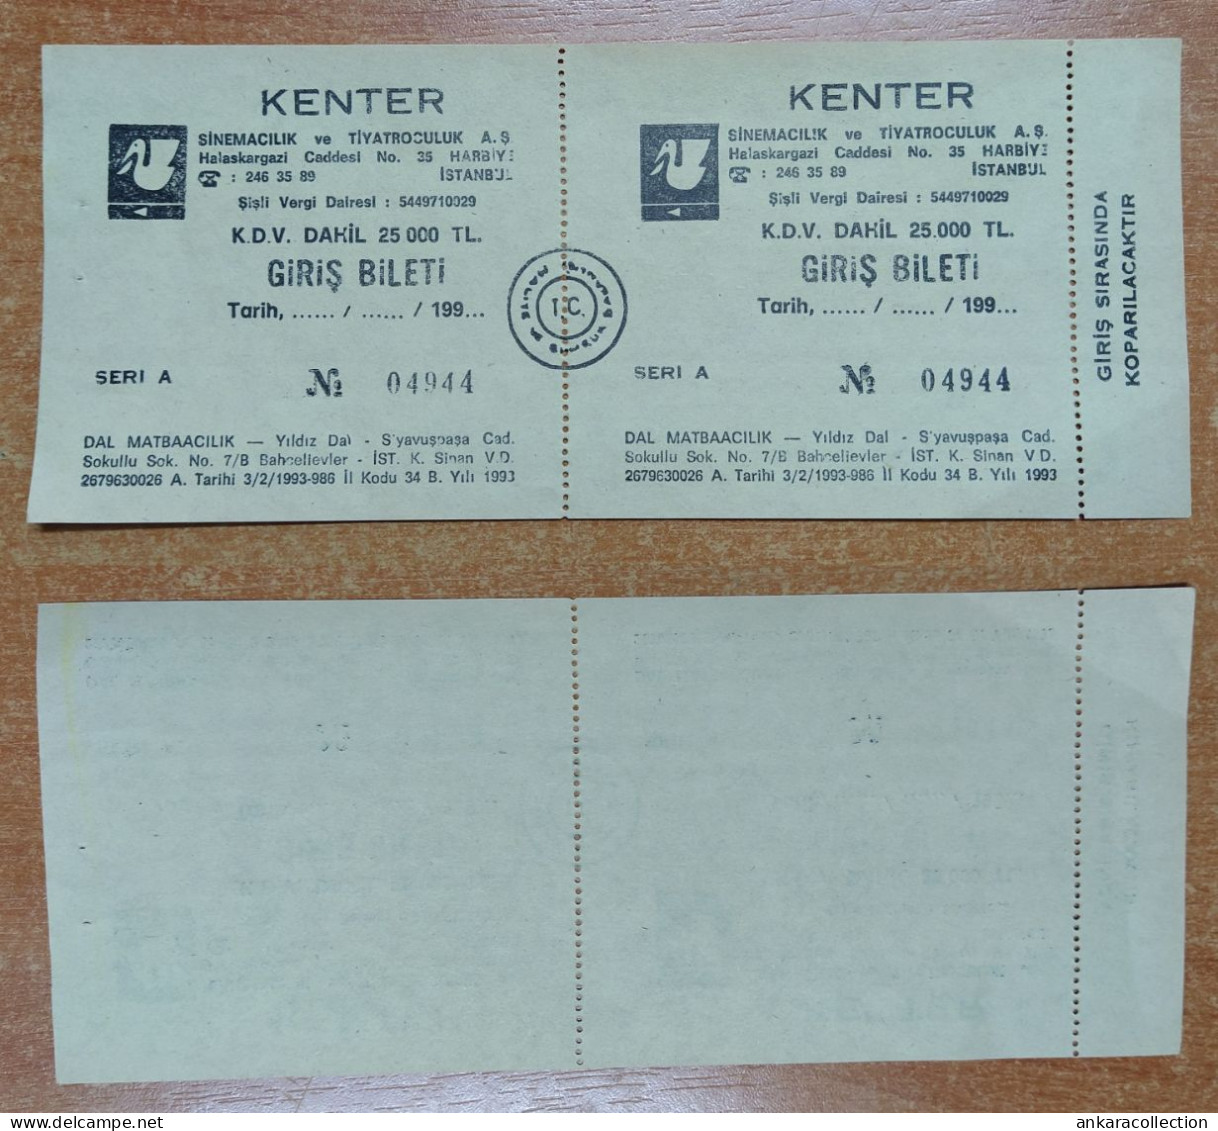 AC - KENTER  CINEMA & THEATER TICKET  1993  ISTANBUL TURKEY CONCERT TICKET WITH COUNTERFOIL - Concerttickets